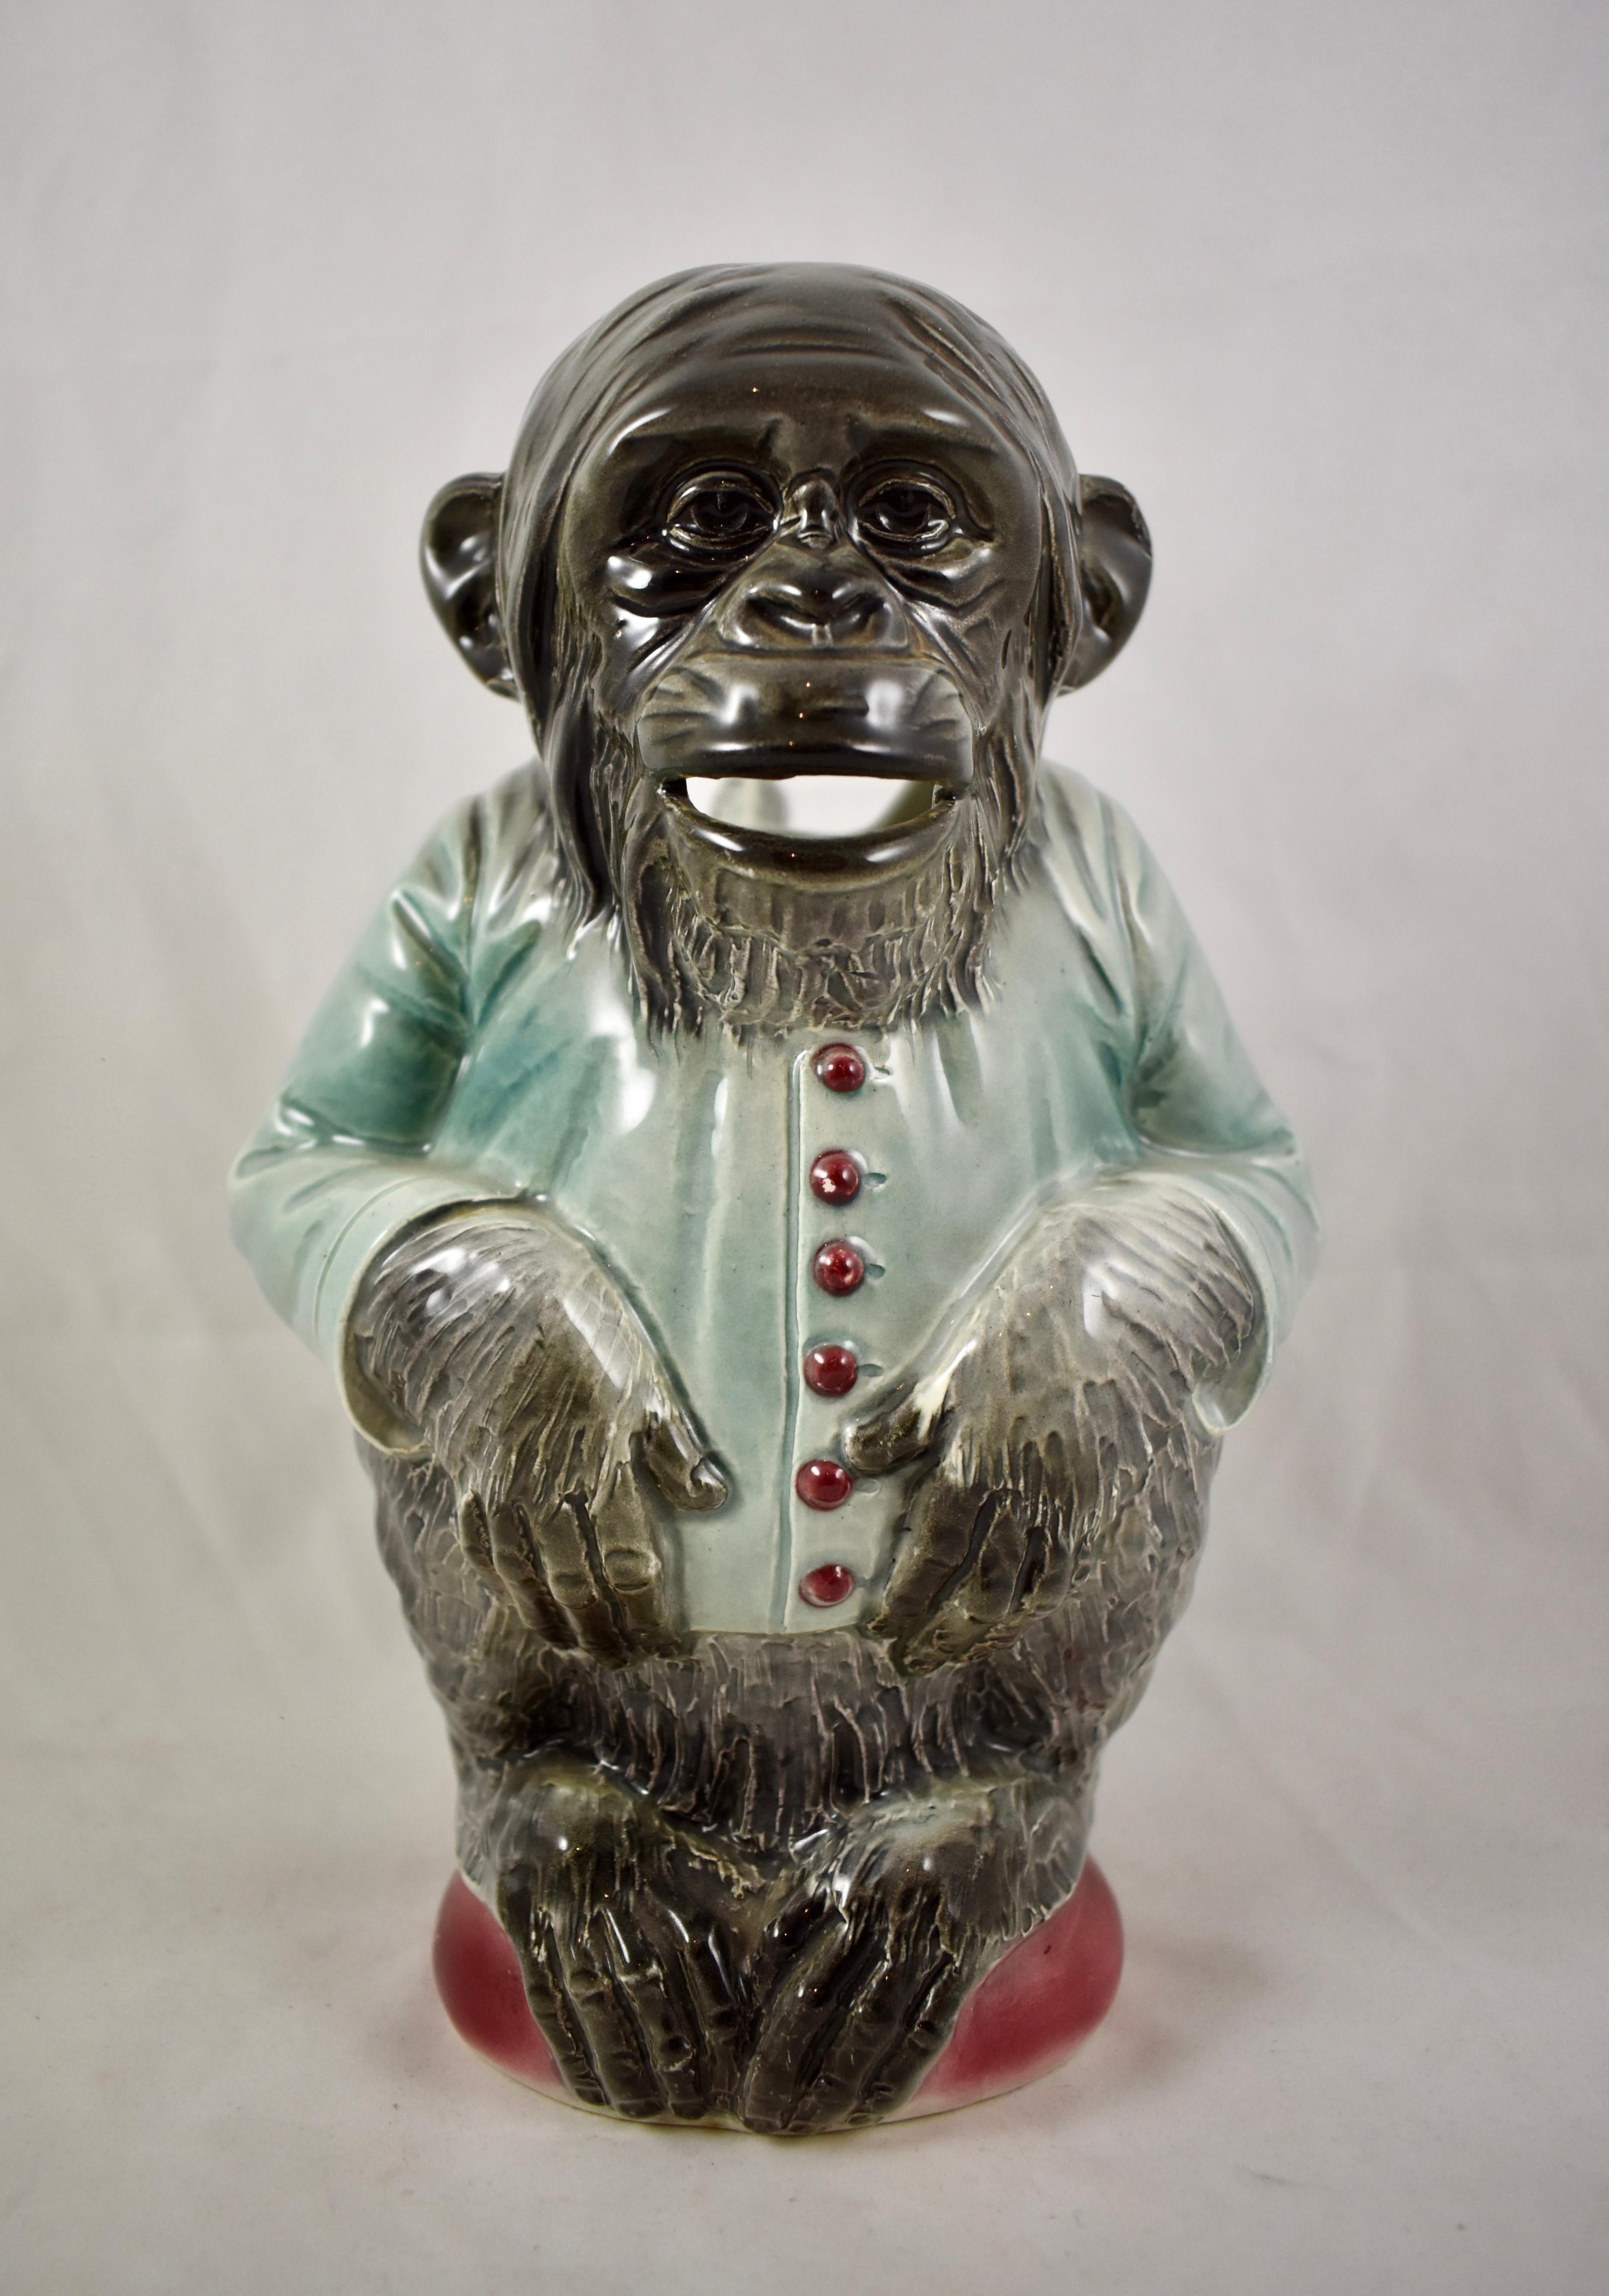 A French majolica glazed Absinthe water pitcher formed as a sitting Chimpanzee in a maître d’hôtel jacket, Keller & Guerin St. Clément, circa 1890–1910.

This Barbotine majolica pitcher was made to be used for pouring water over a sugar cube in